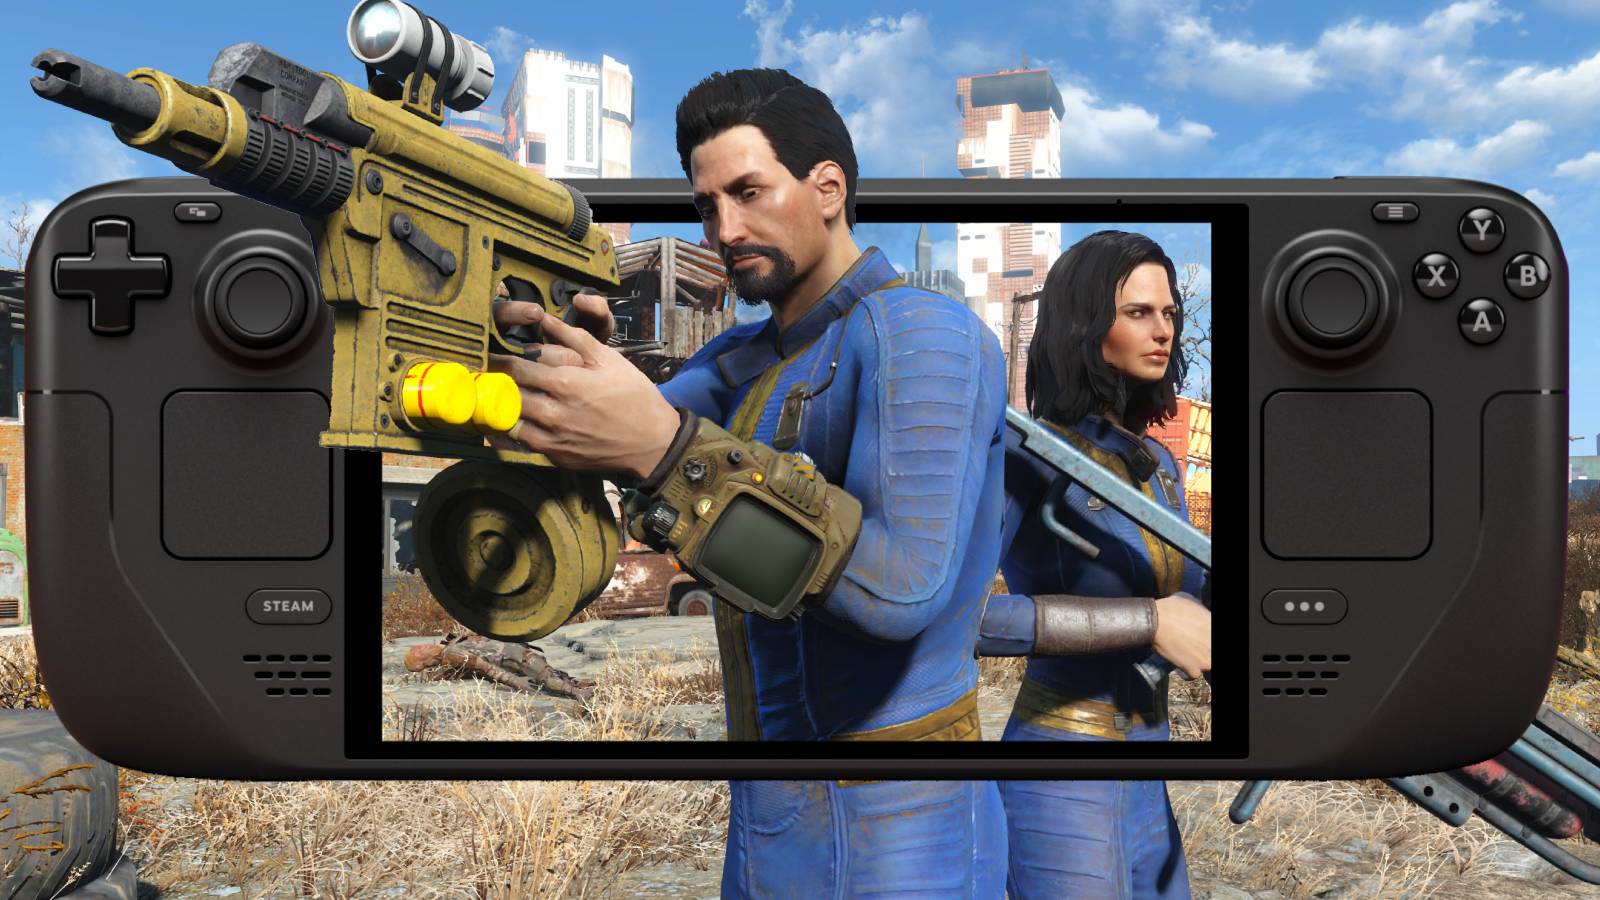 New screenshot from the Fallout 4 update, on the screen of a Steam Deck.